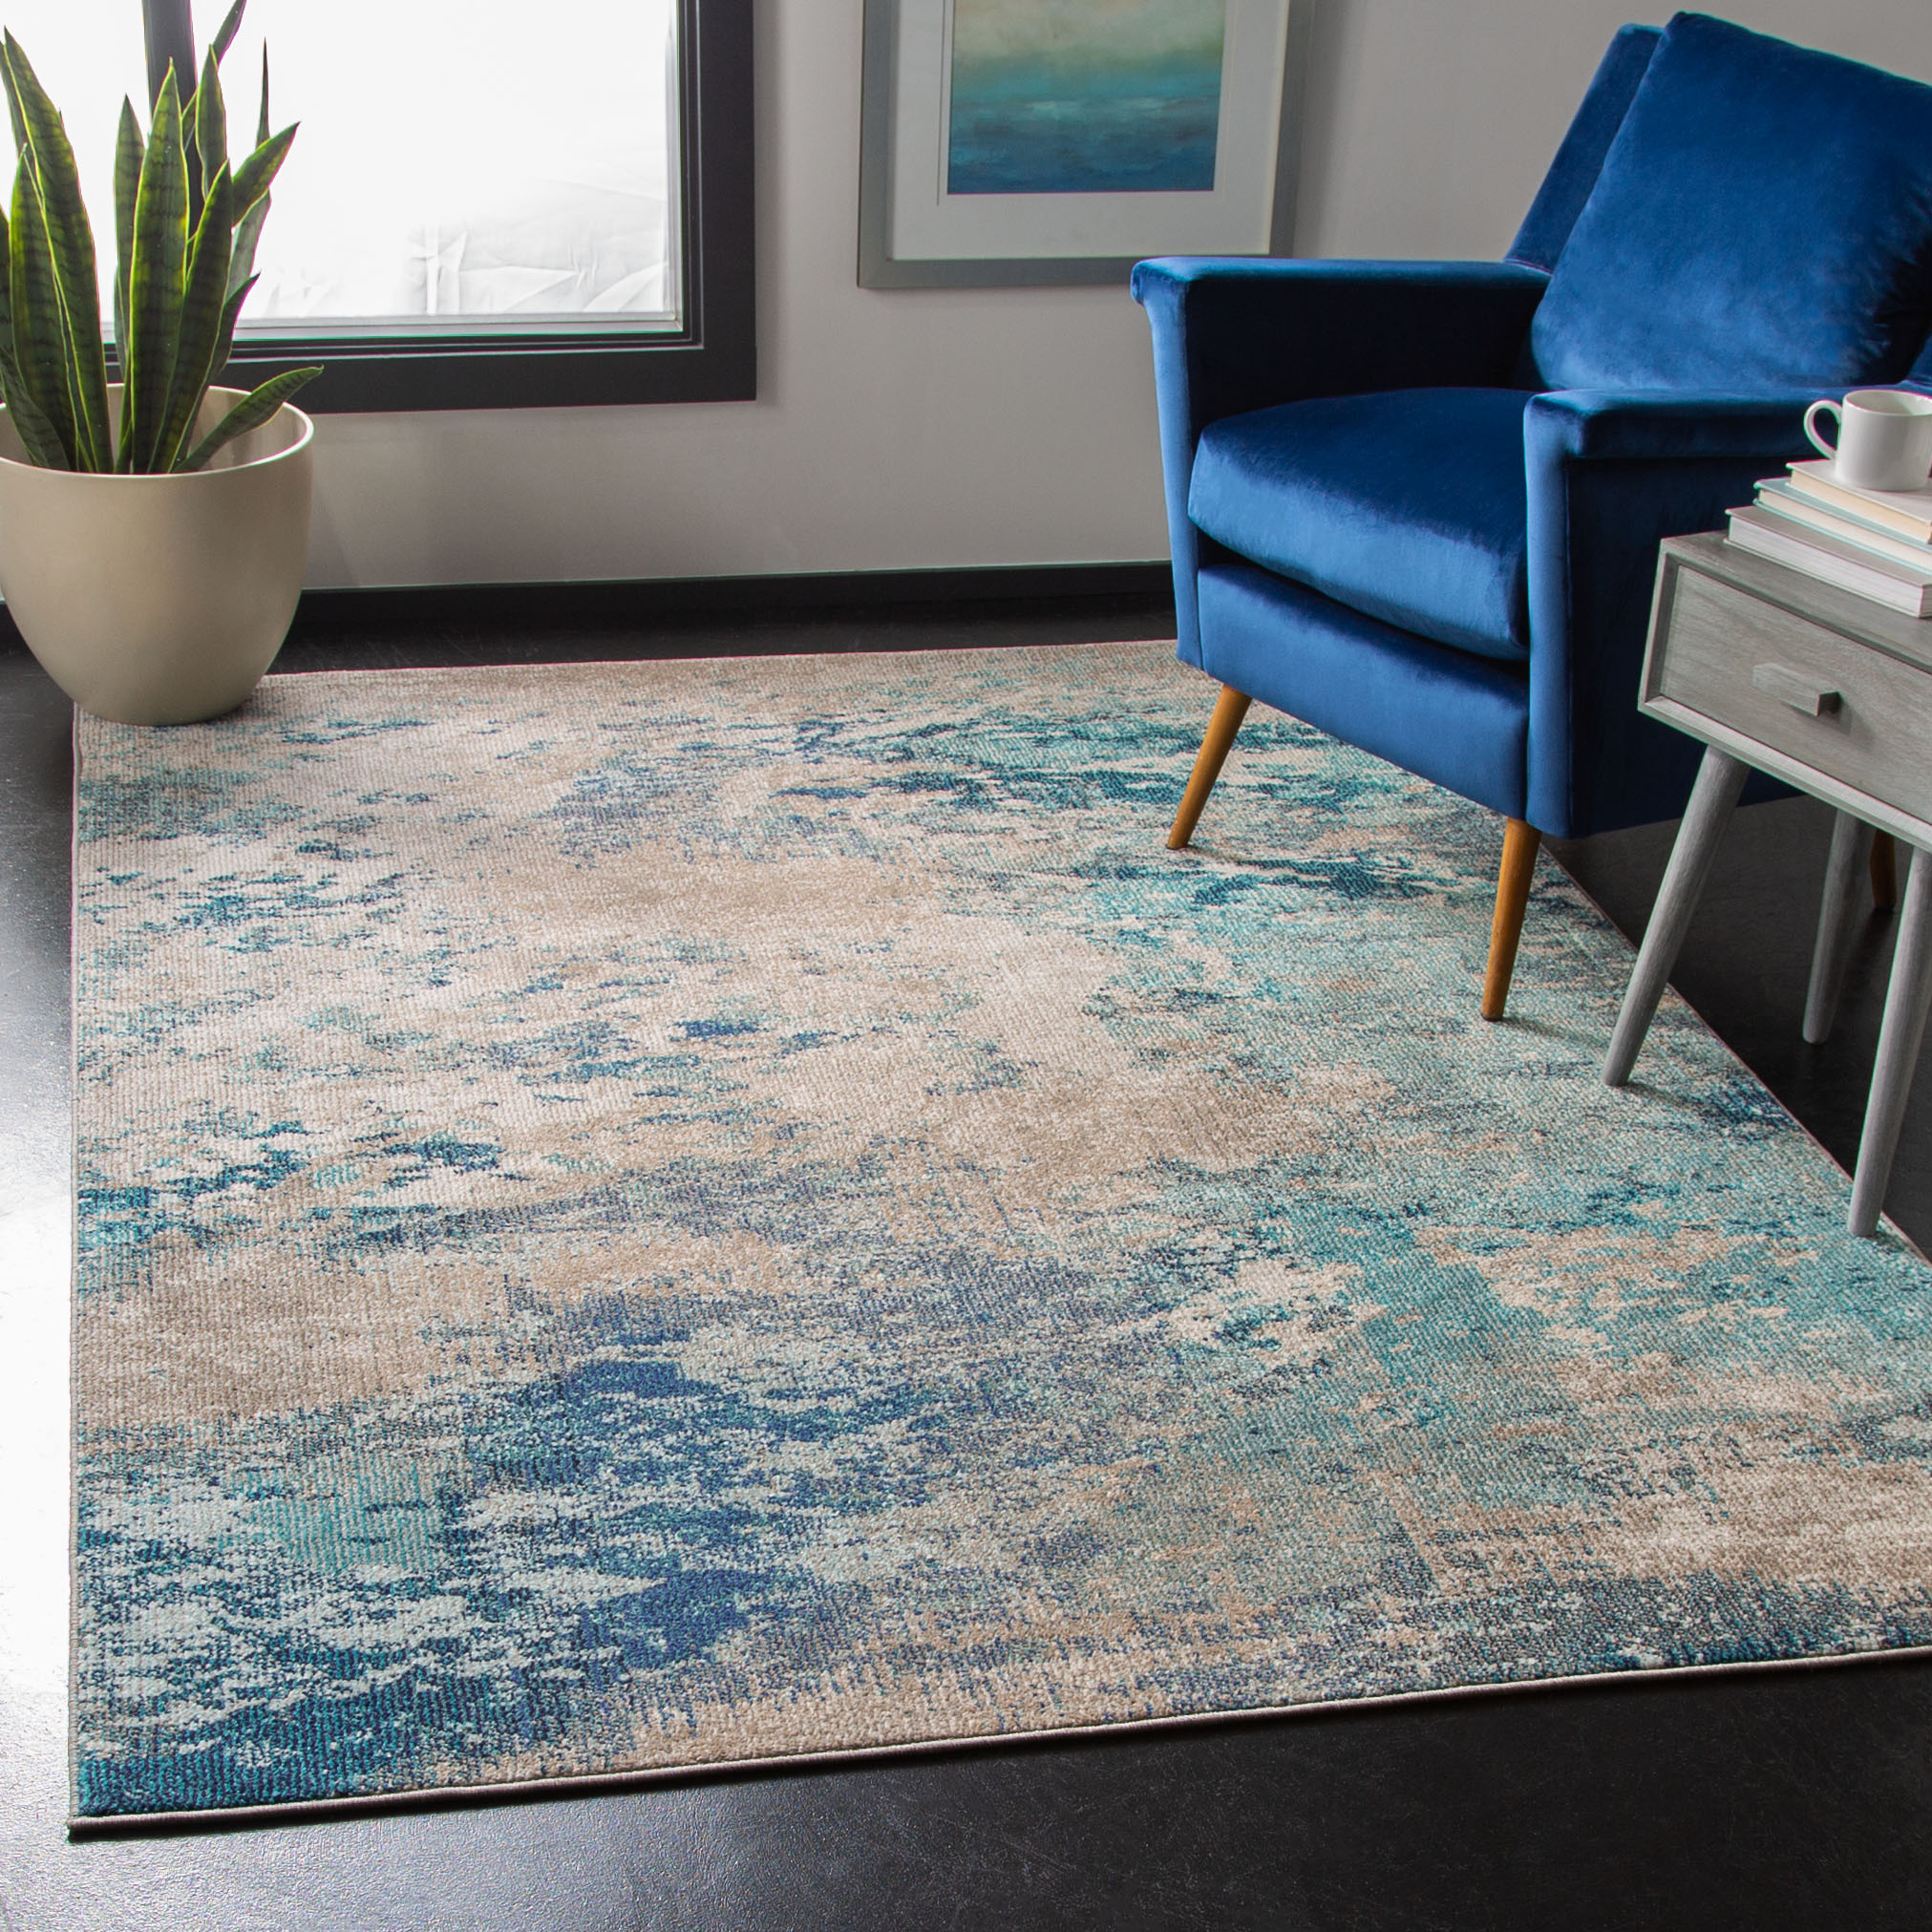 SAFAVIEH Madison Oscar Abstract Distressed Area Rug, Blue/Grey, 4' x 4' Square - image 2 of 7